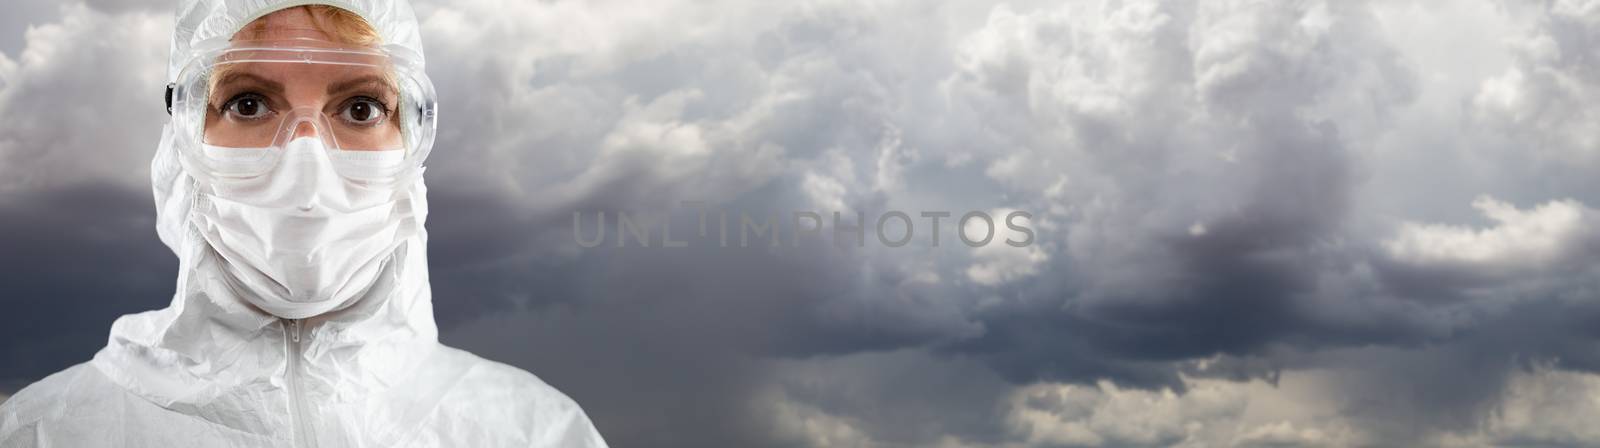 Female Medical Worker Wearing Protective Face Mask and Gear Against Cloudy Stormy Sky. by Feverpitched